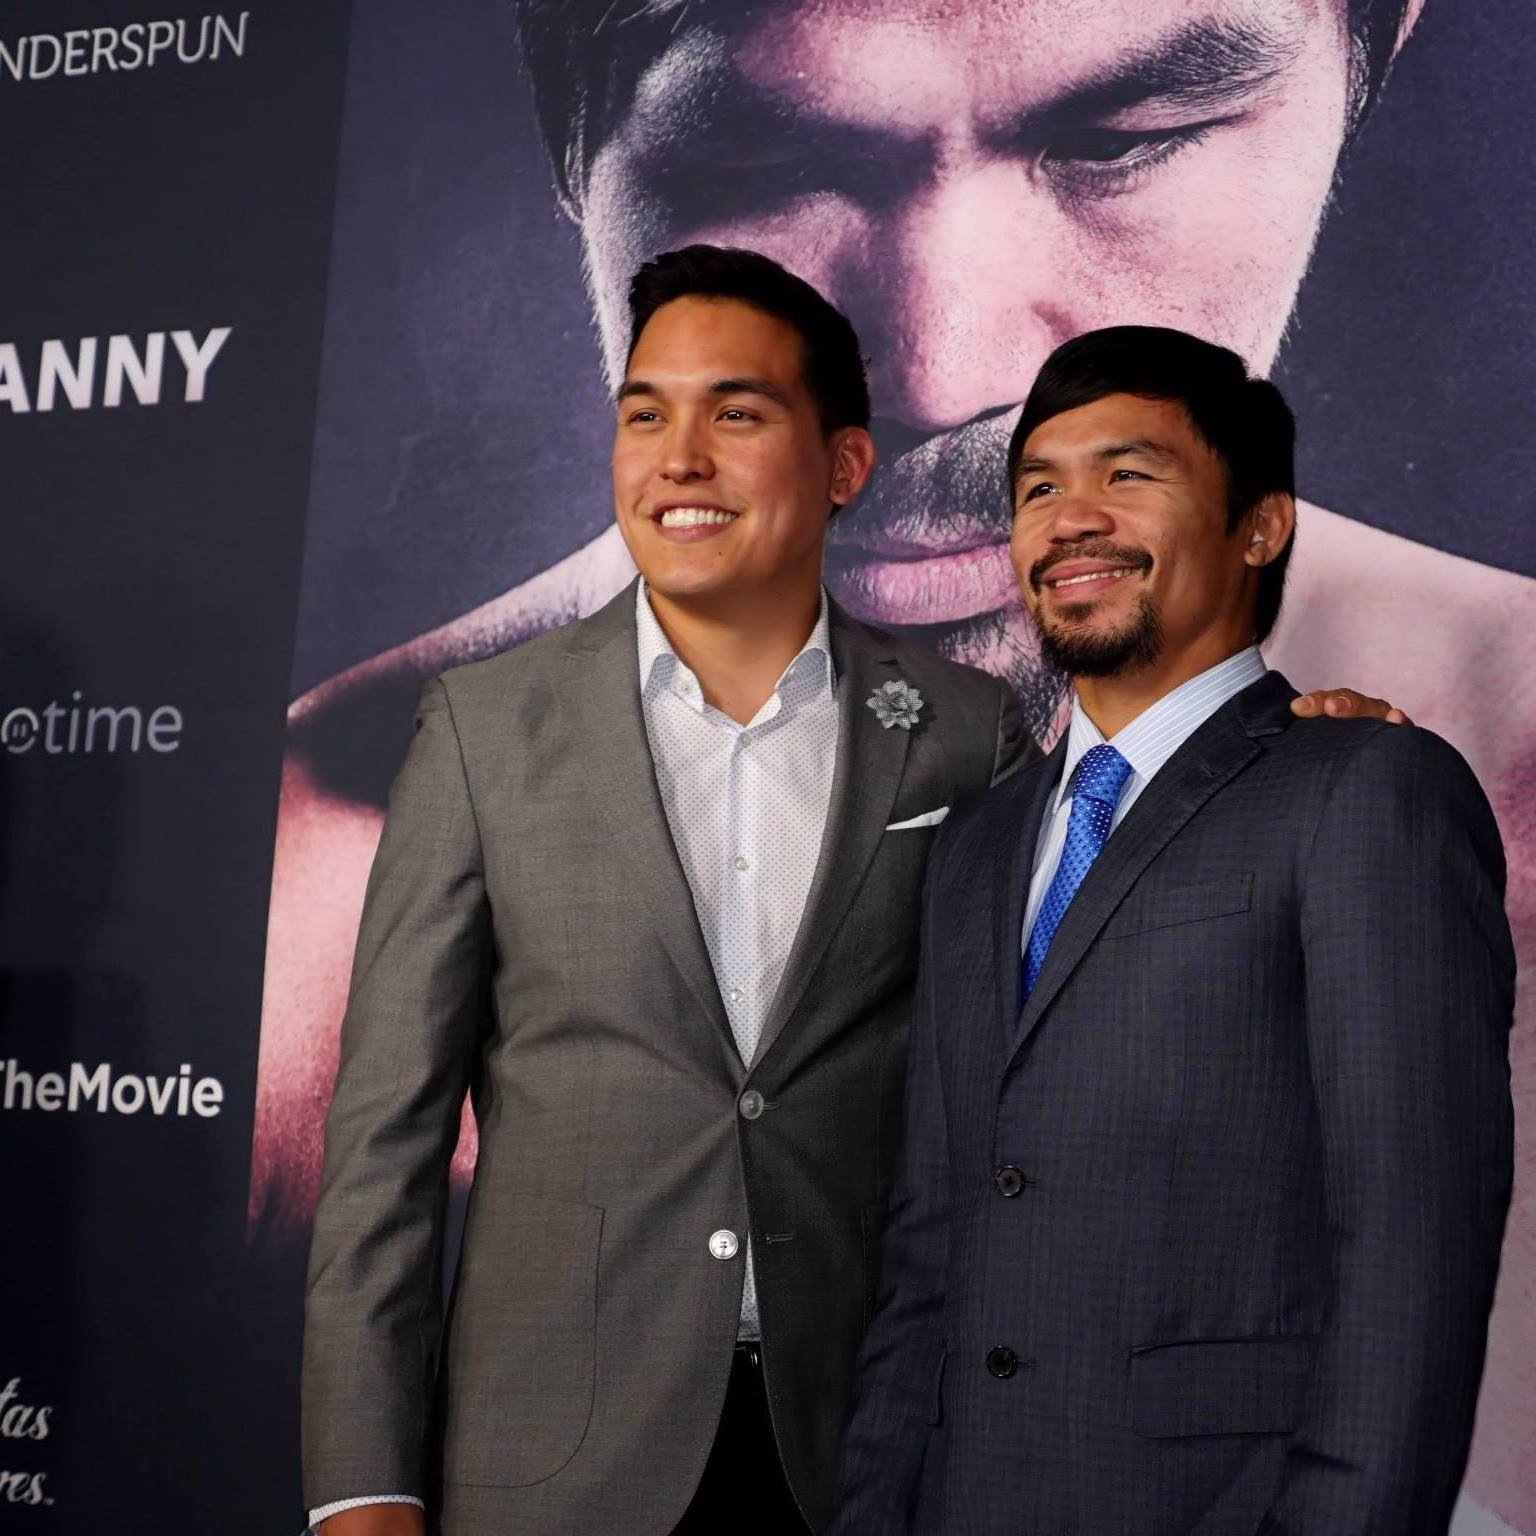 Ryan Moore & Manny Pacquiao